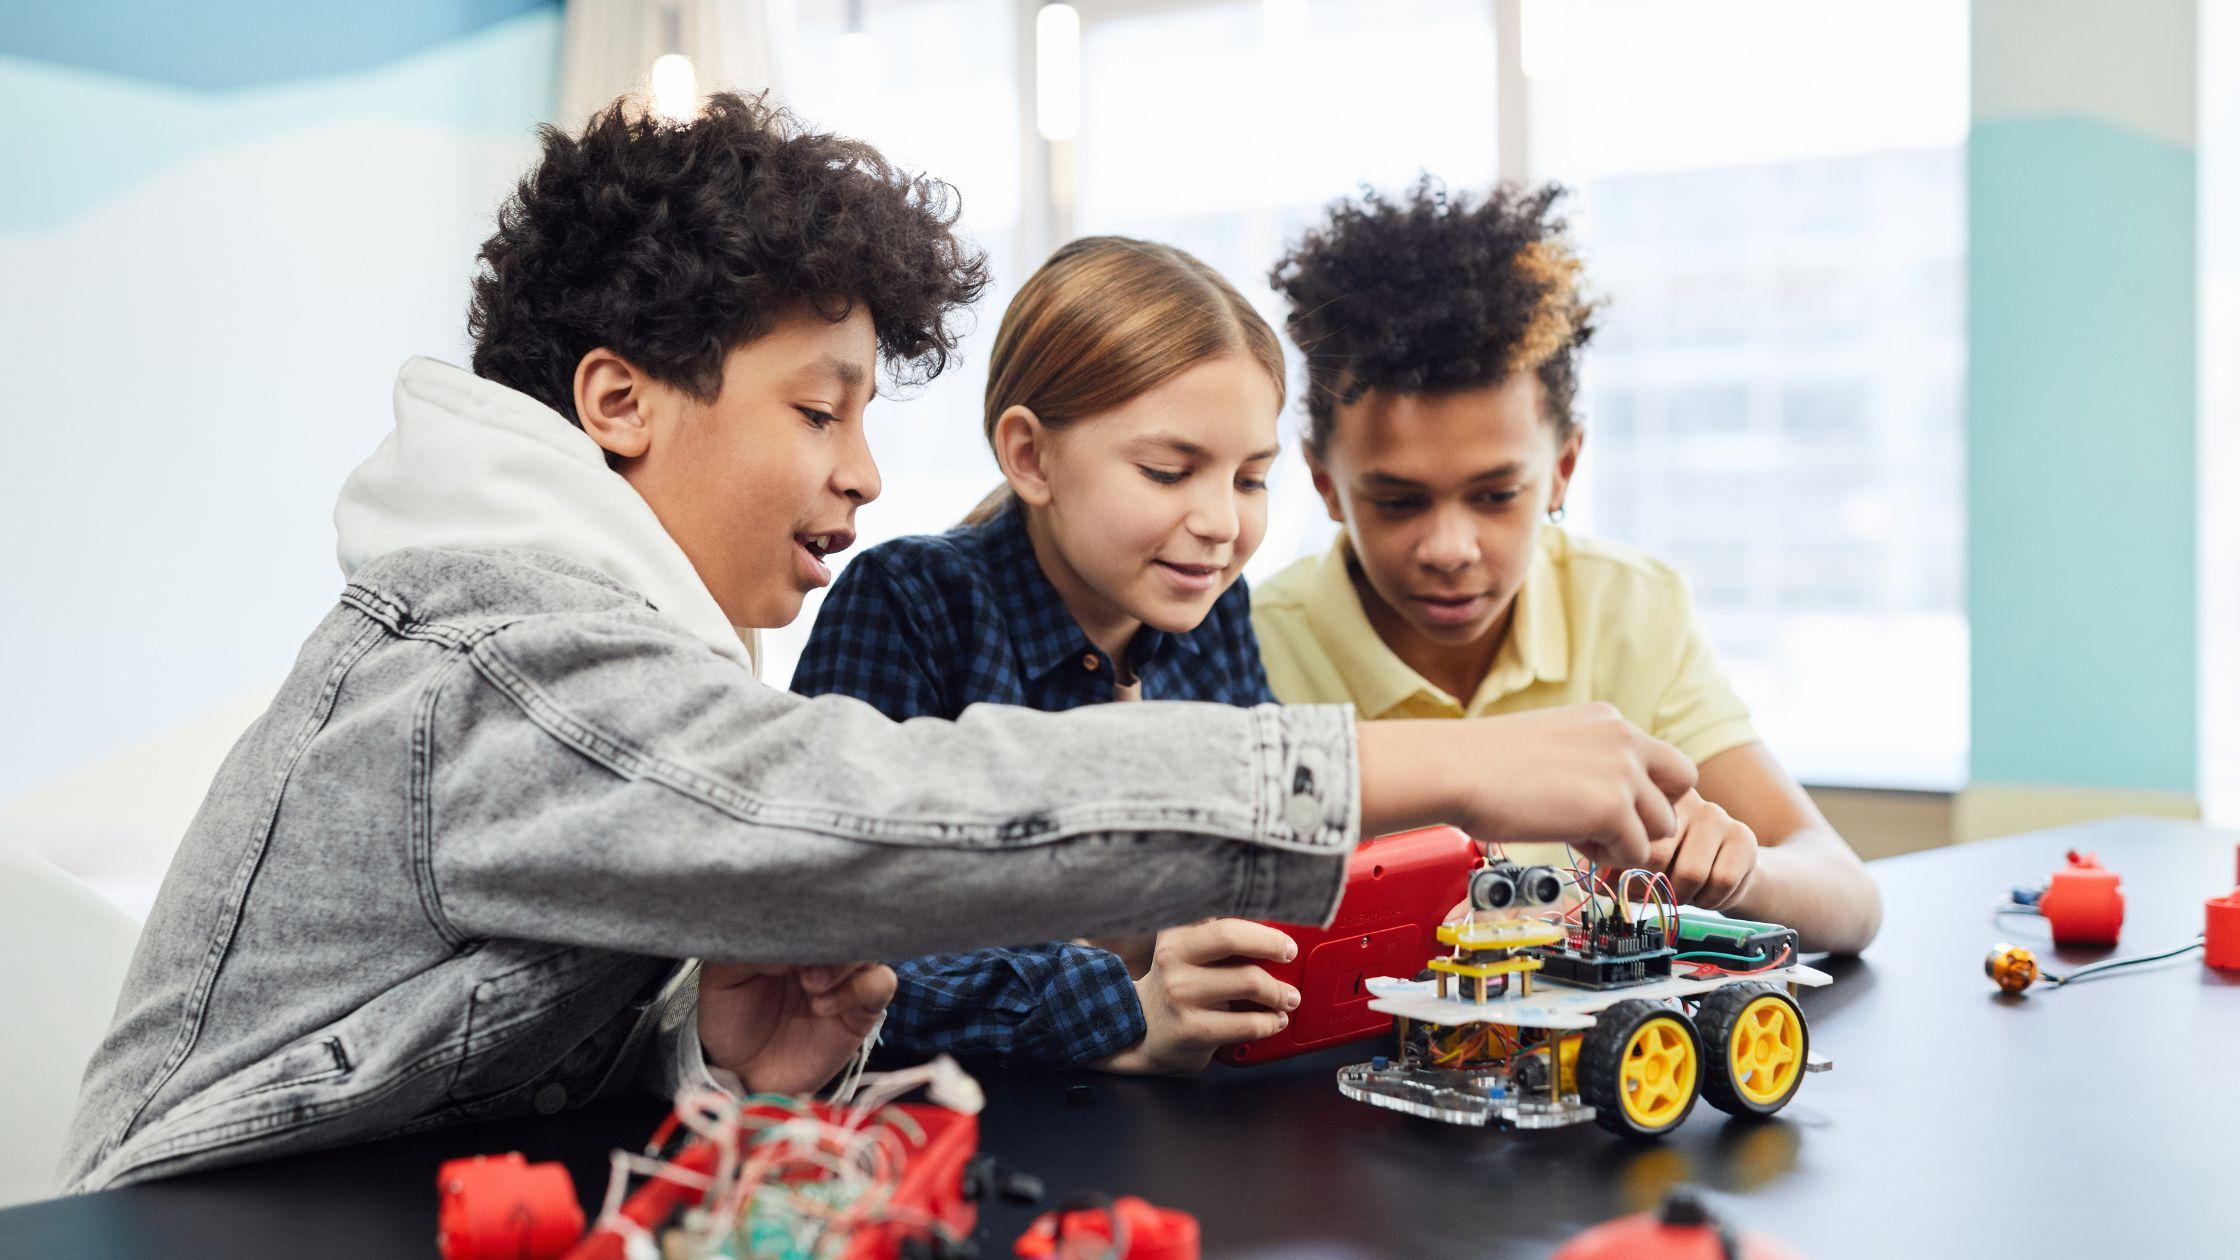 Robotics Courses for Kids at OAKLearning Center